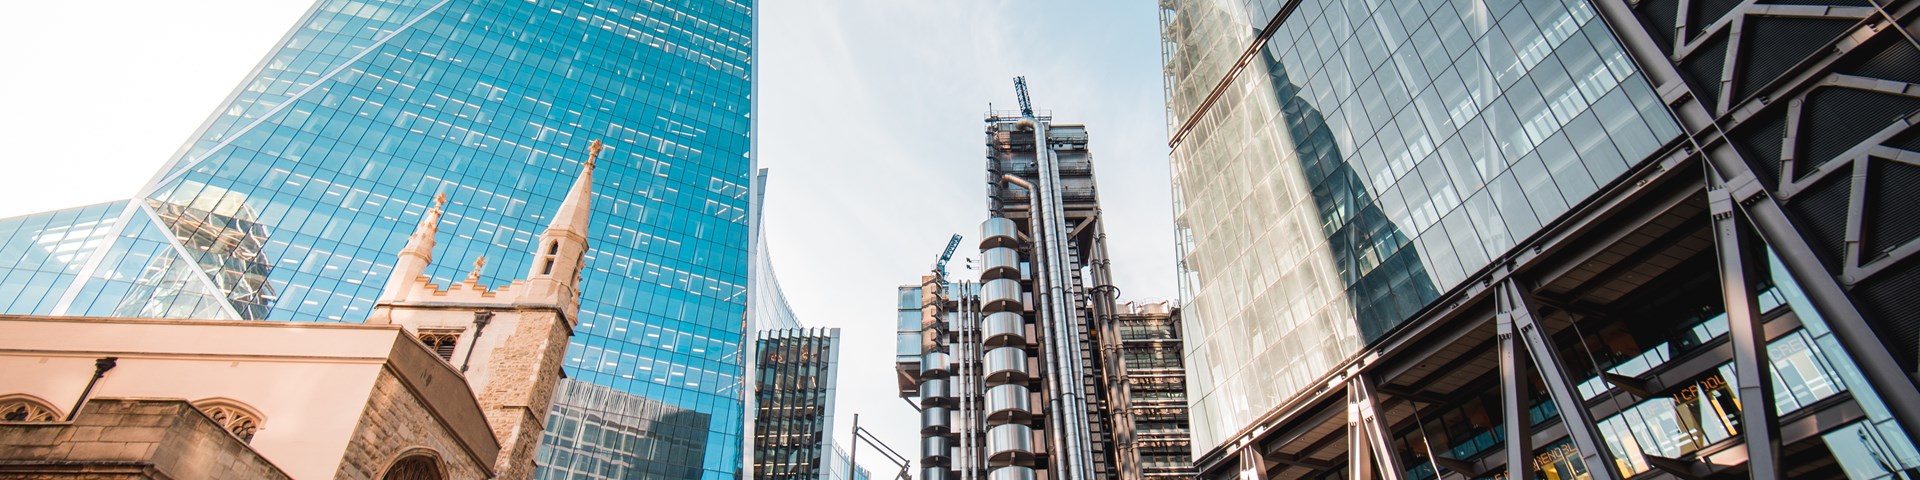 Iconic London City Buildings From left to right - St Andrew Undershaft Church, The Scalpel, Lloyd's of London, Leadenhall Building.